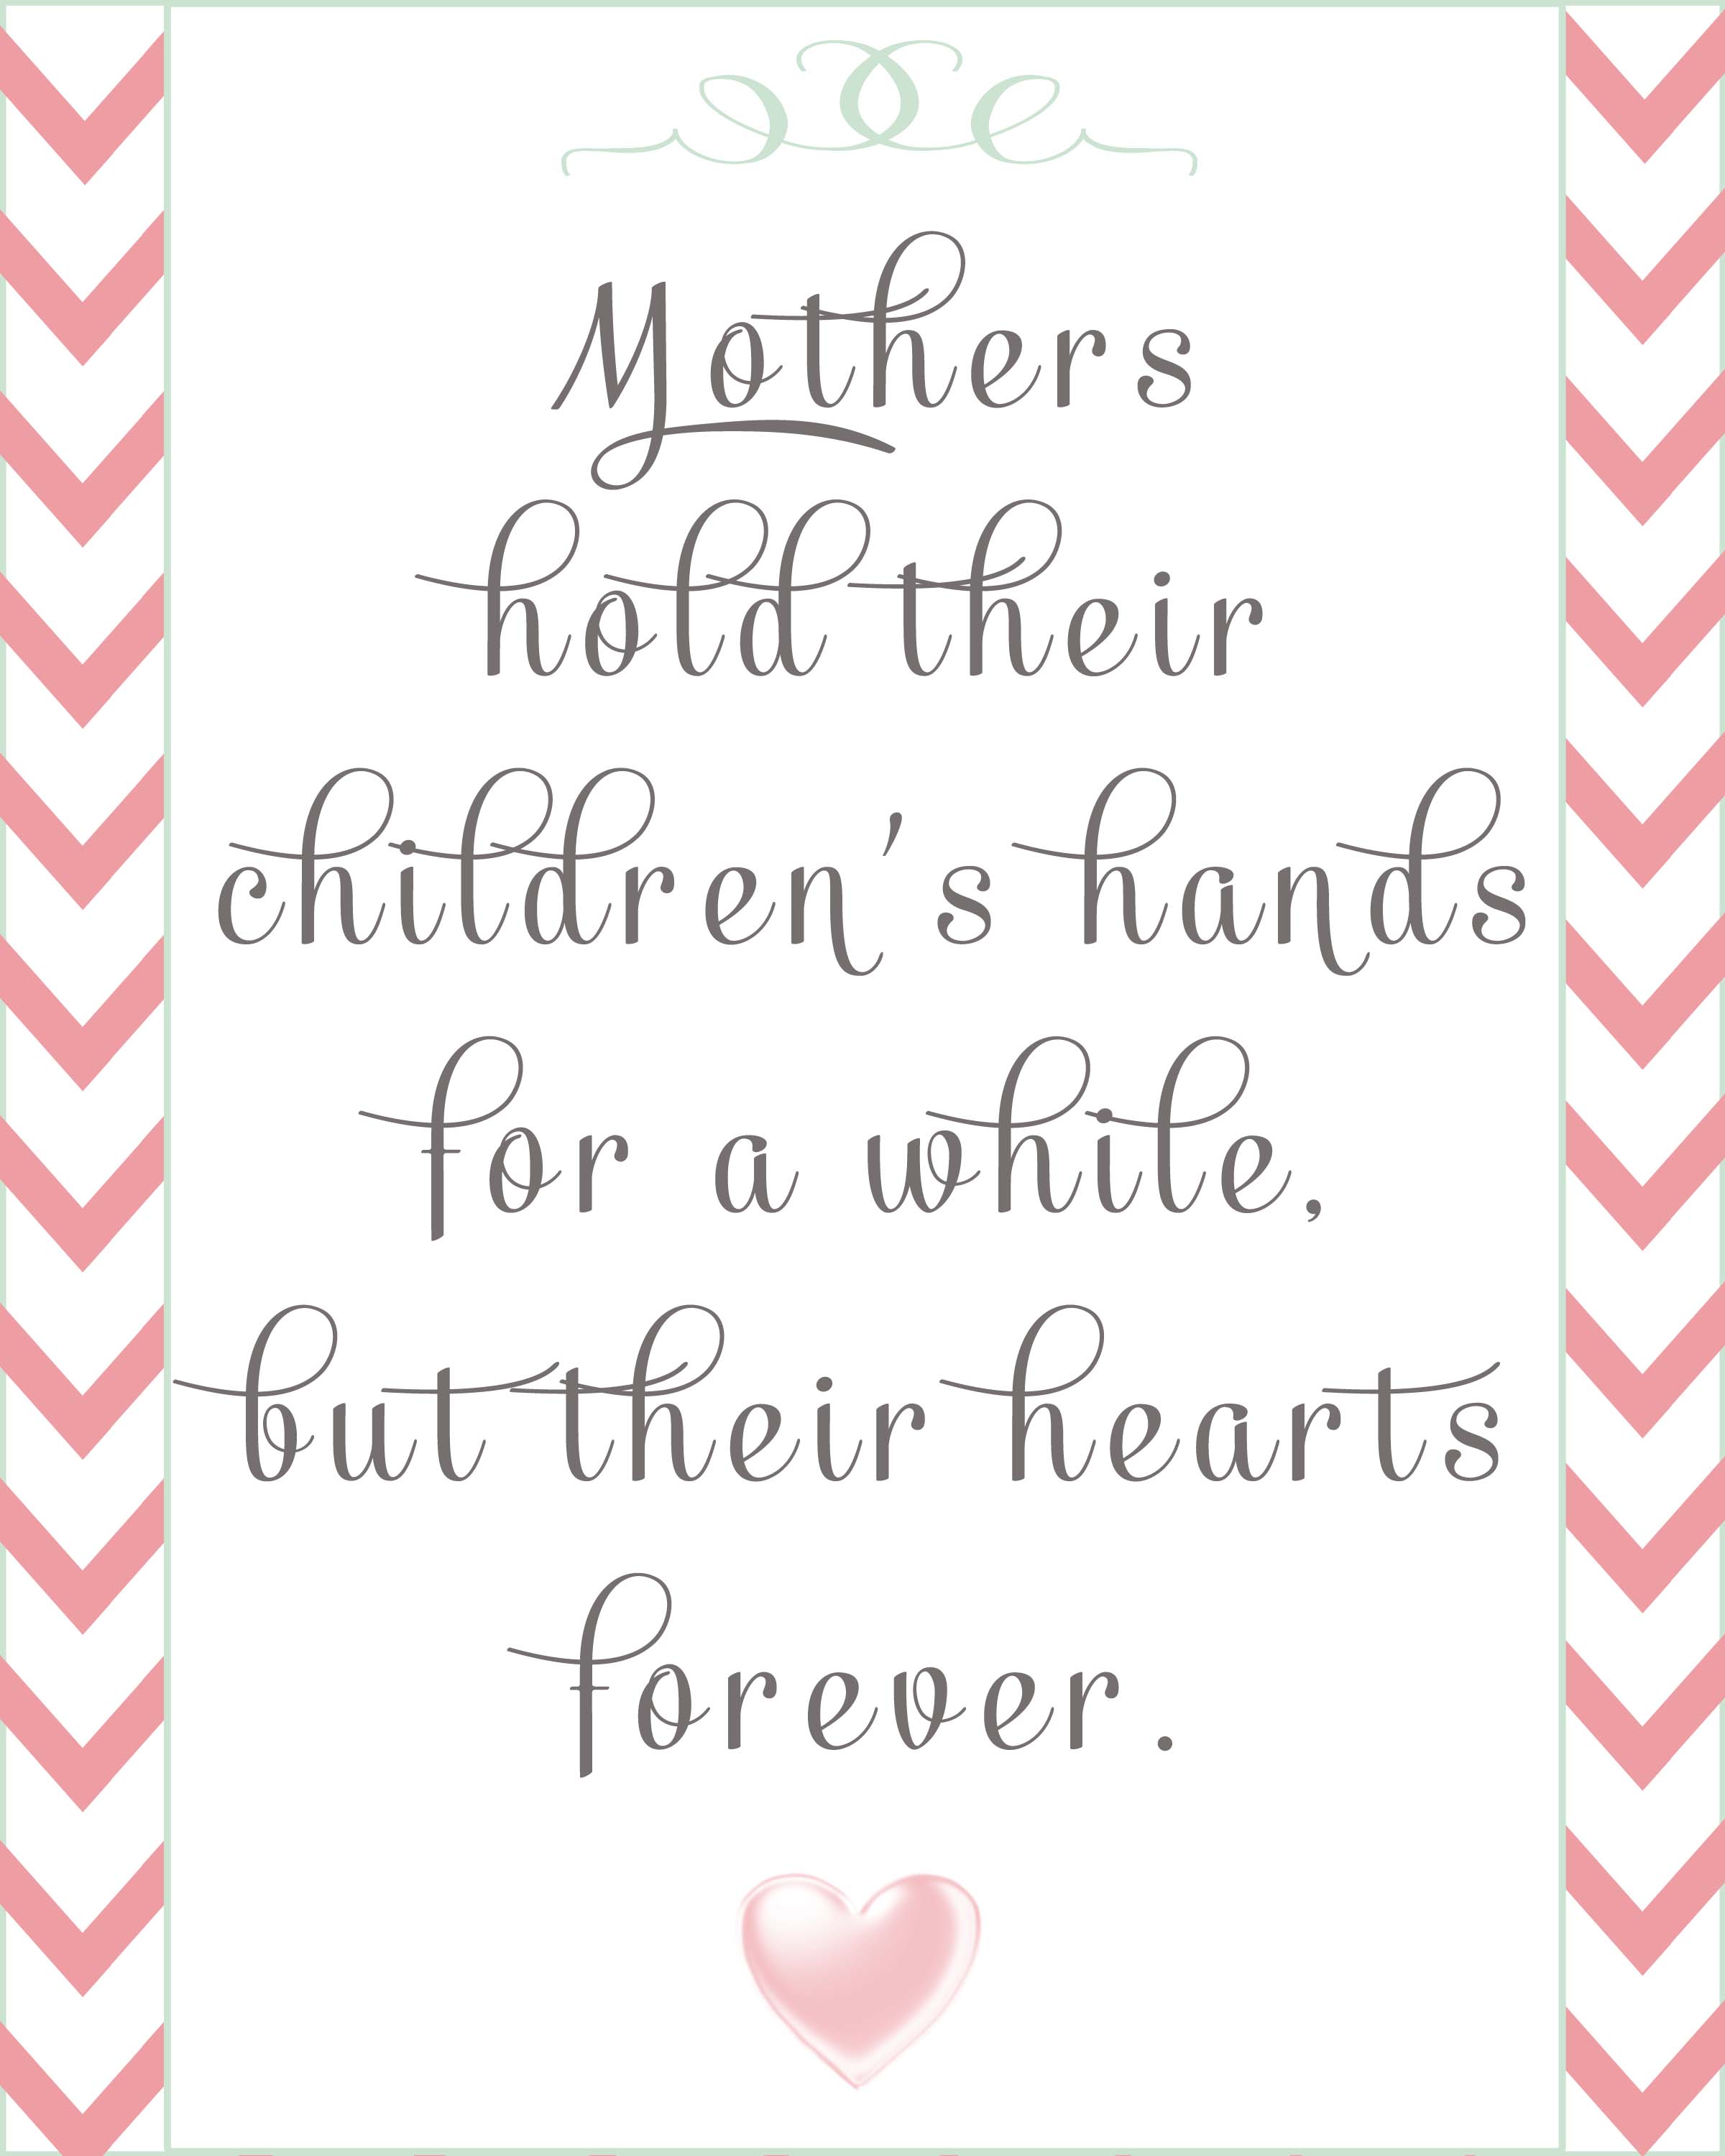 clipart mothers day poems - photo #41